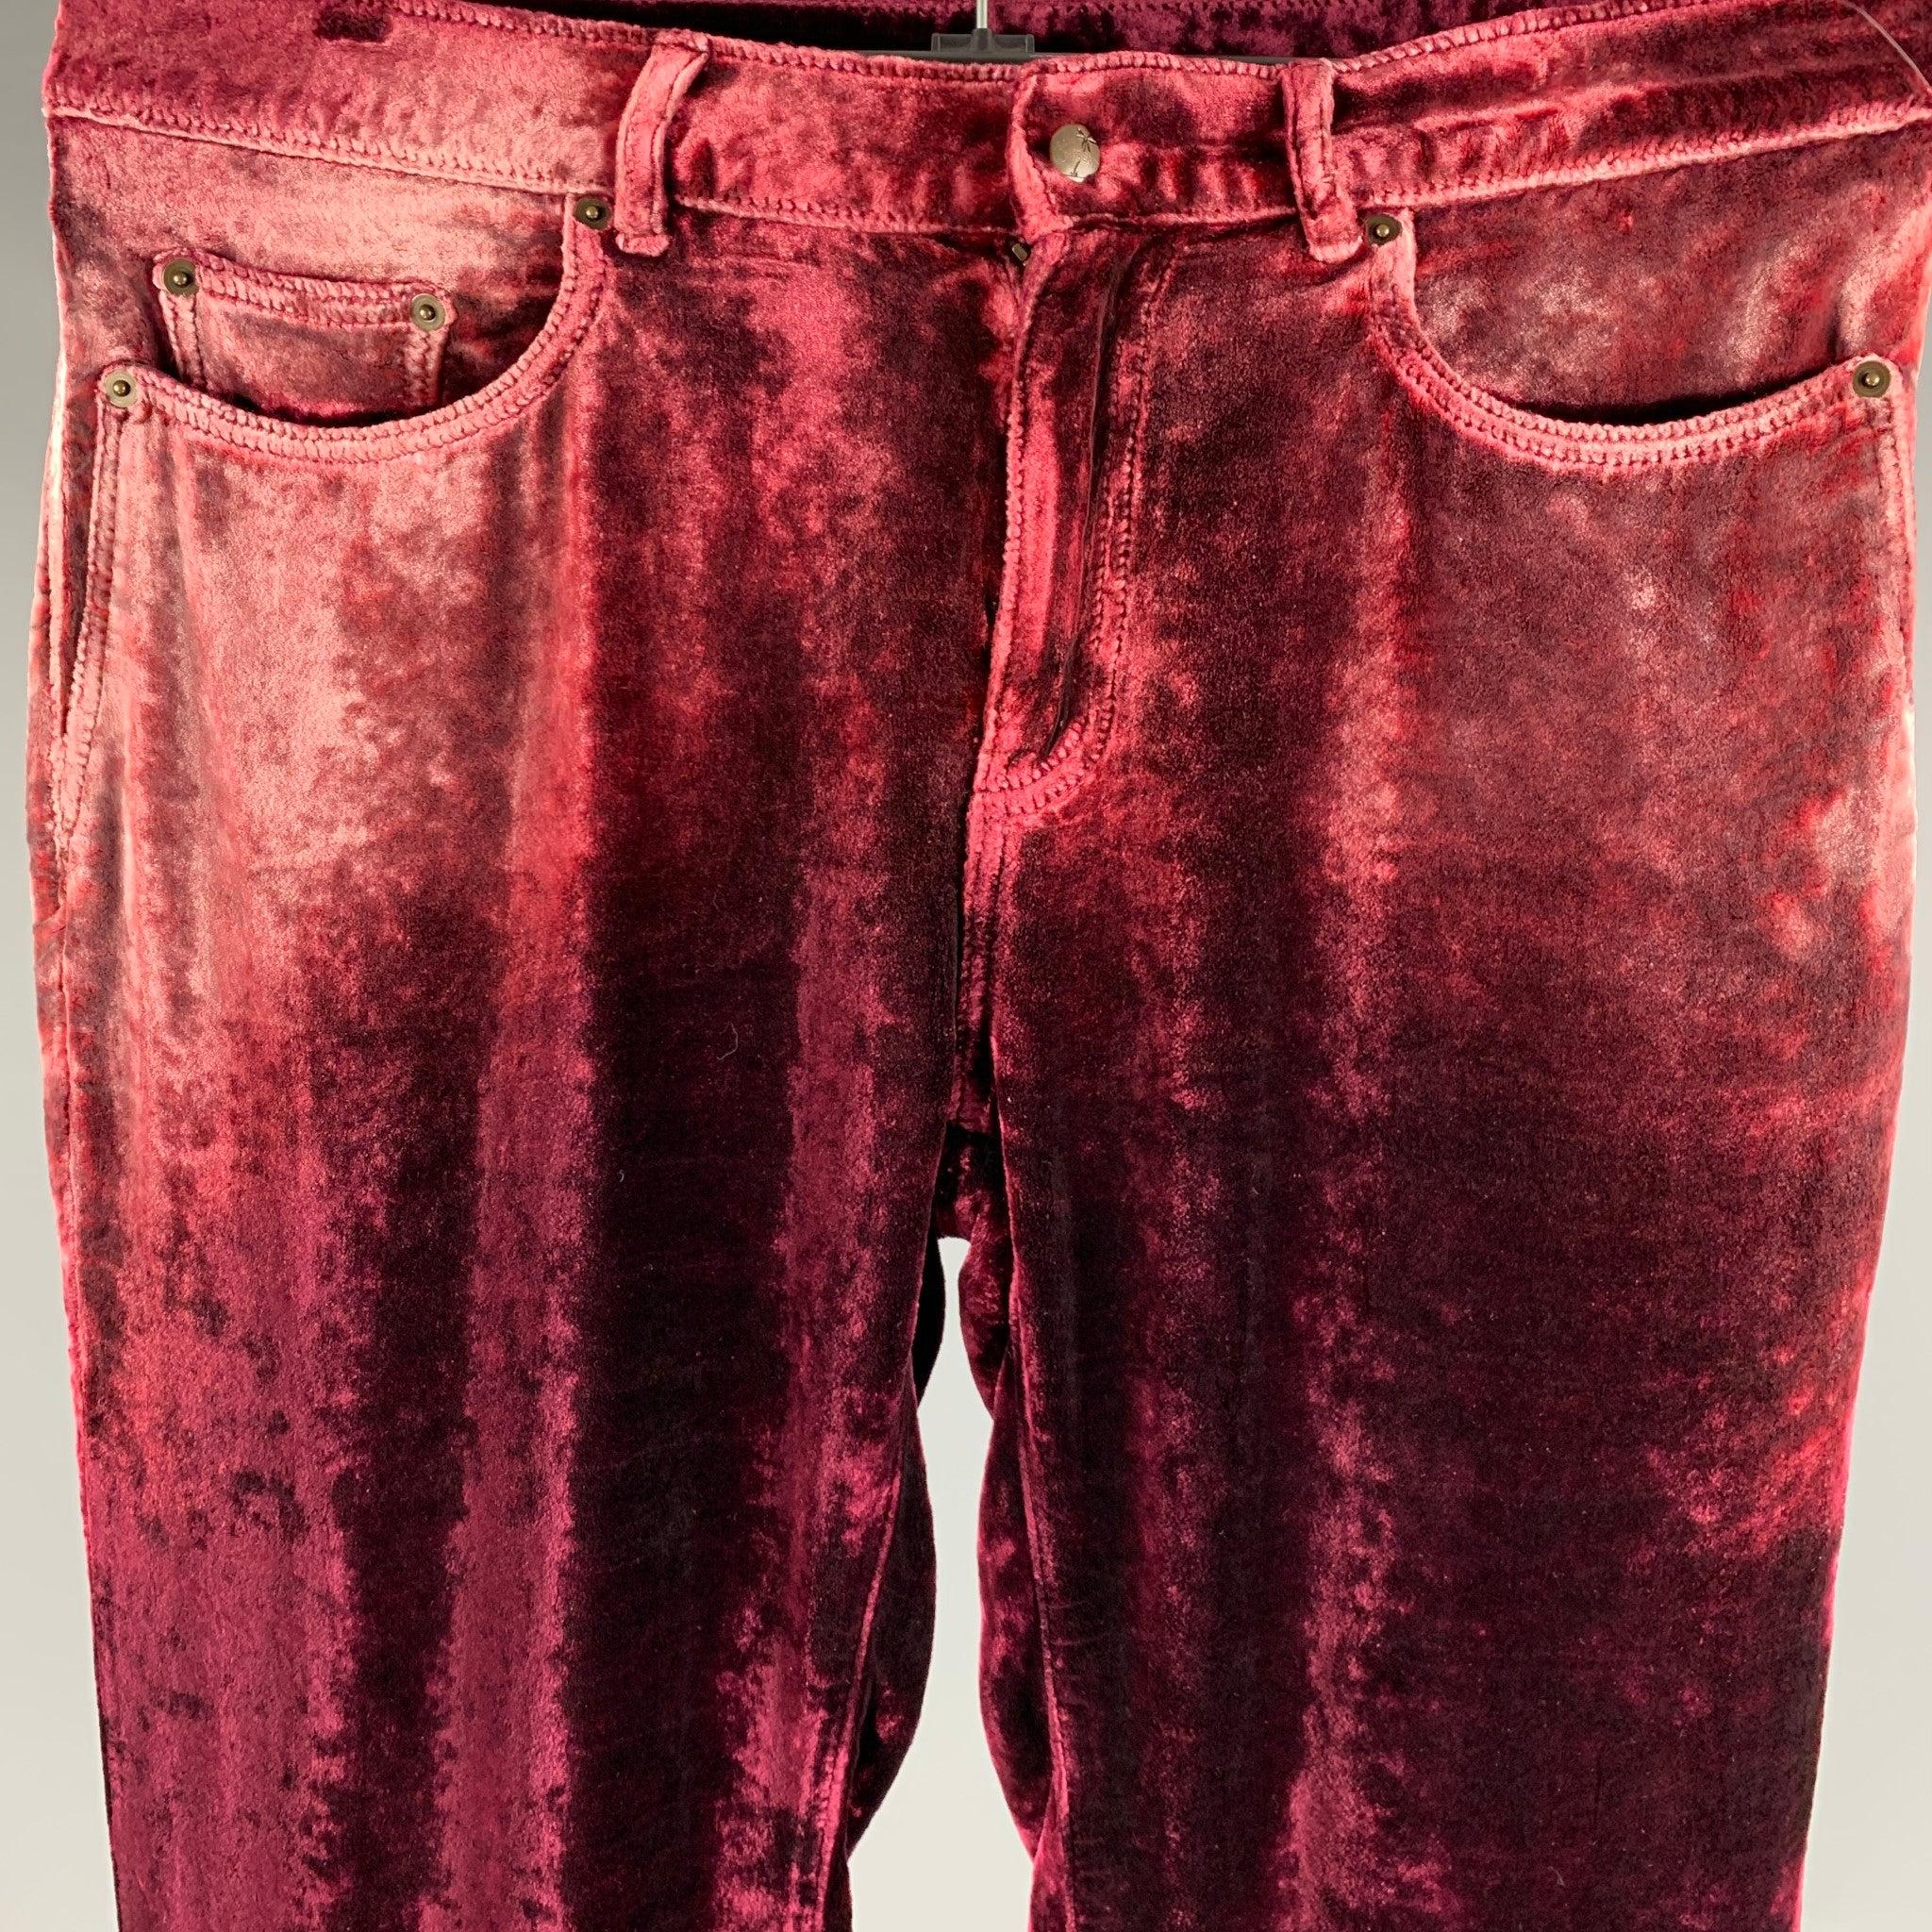 SAINT LAURENT casual pants in
a burgundy velvet viscose silk blend featuring featuring a jean cut and a zip fly closure. Made in ItalyVery Good Pre-Owned Condition. 

Marked:   size not marked 

Measurements: 
  Waist: 33 inches Rise: 9 inches